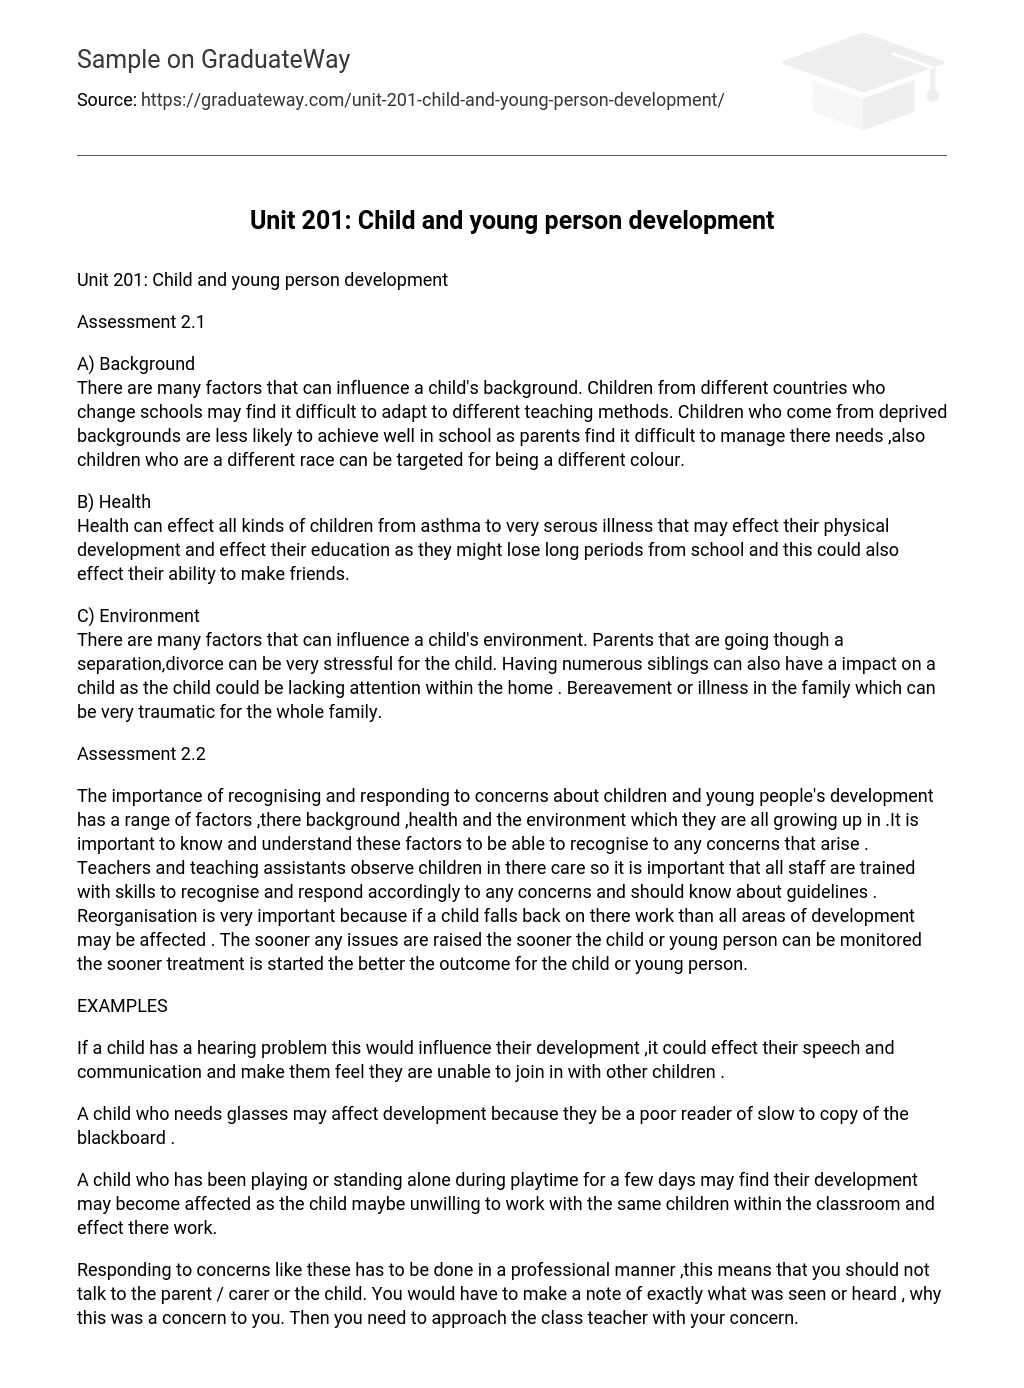 Unit 201: Child and young person development